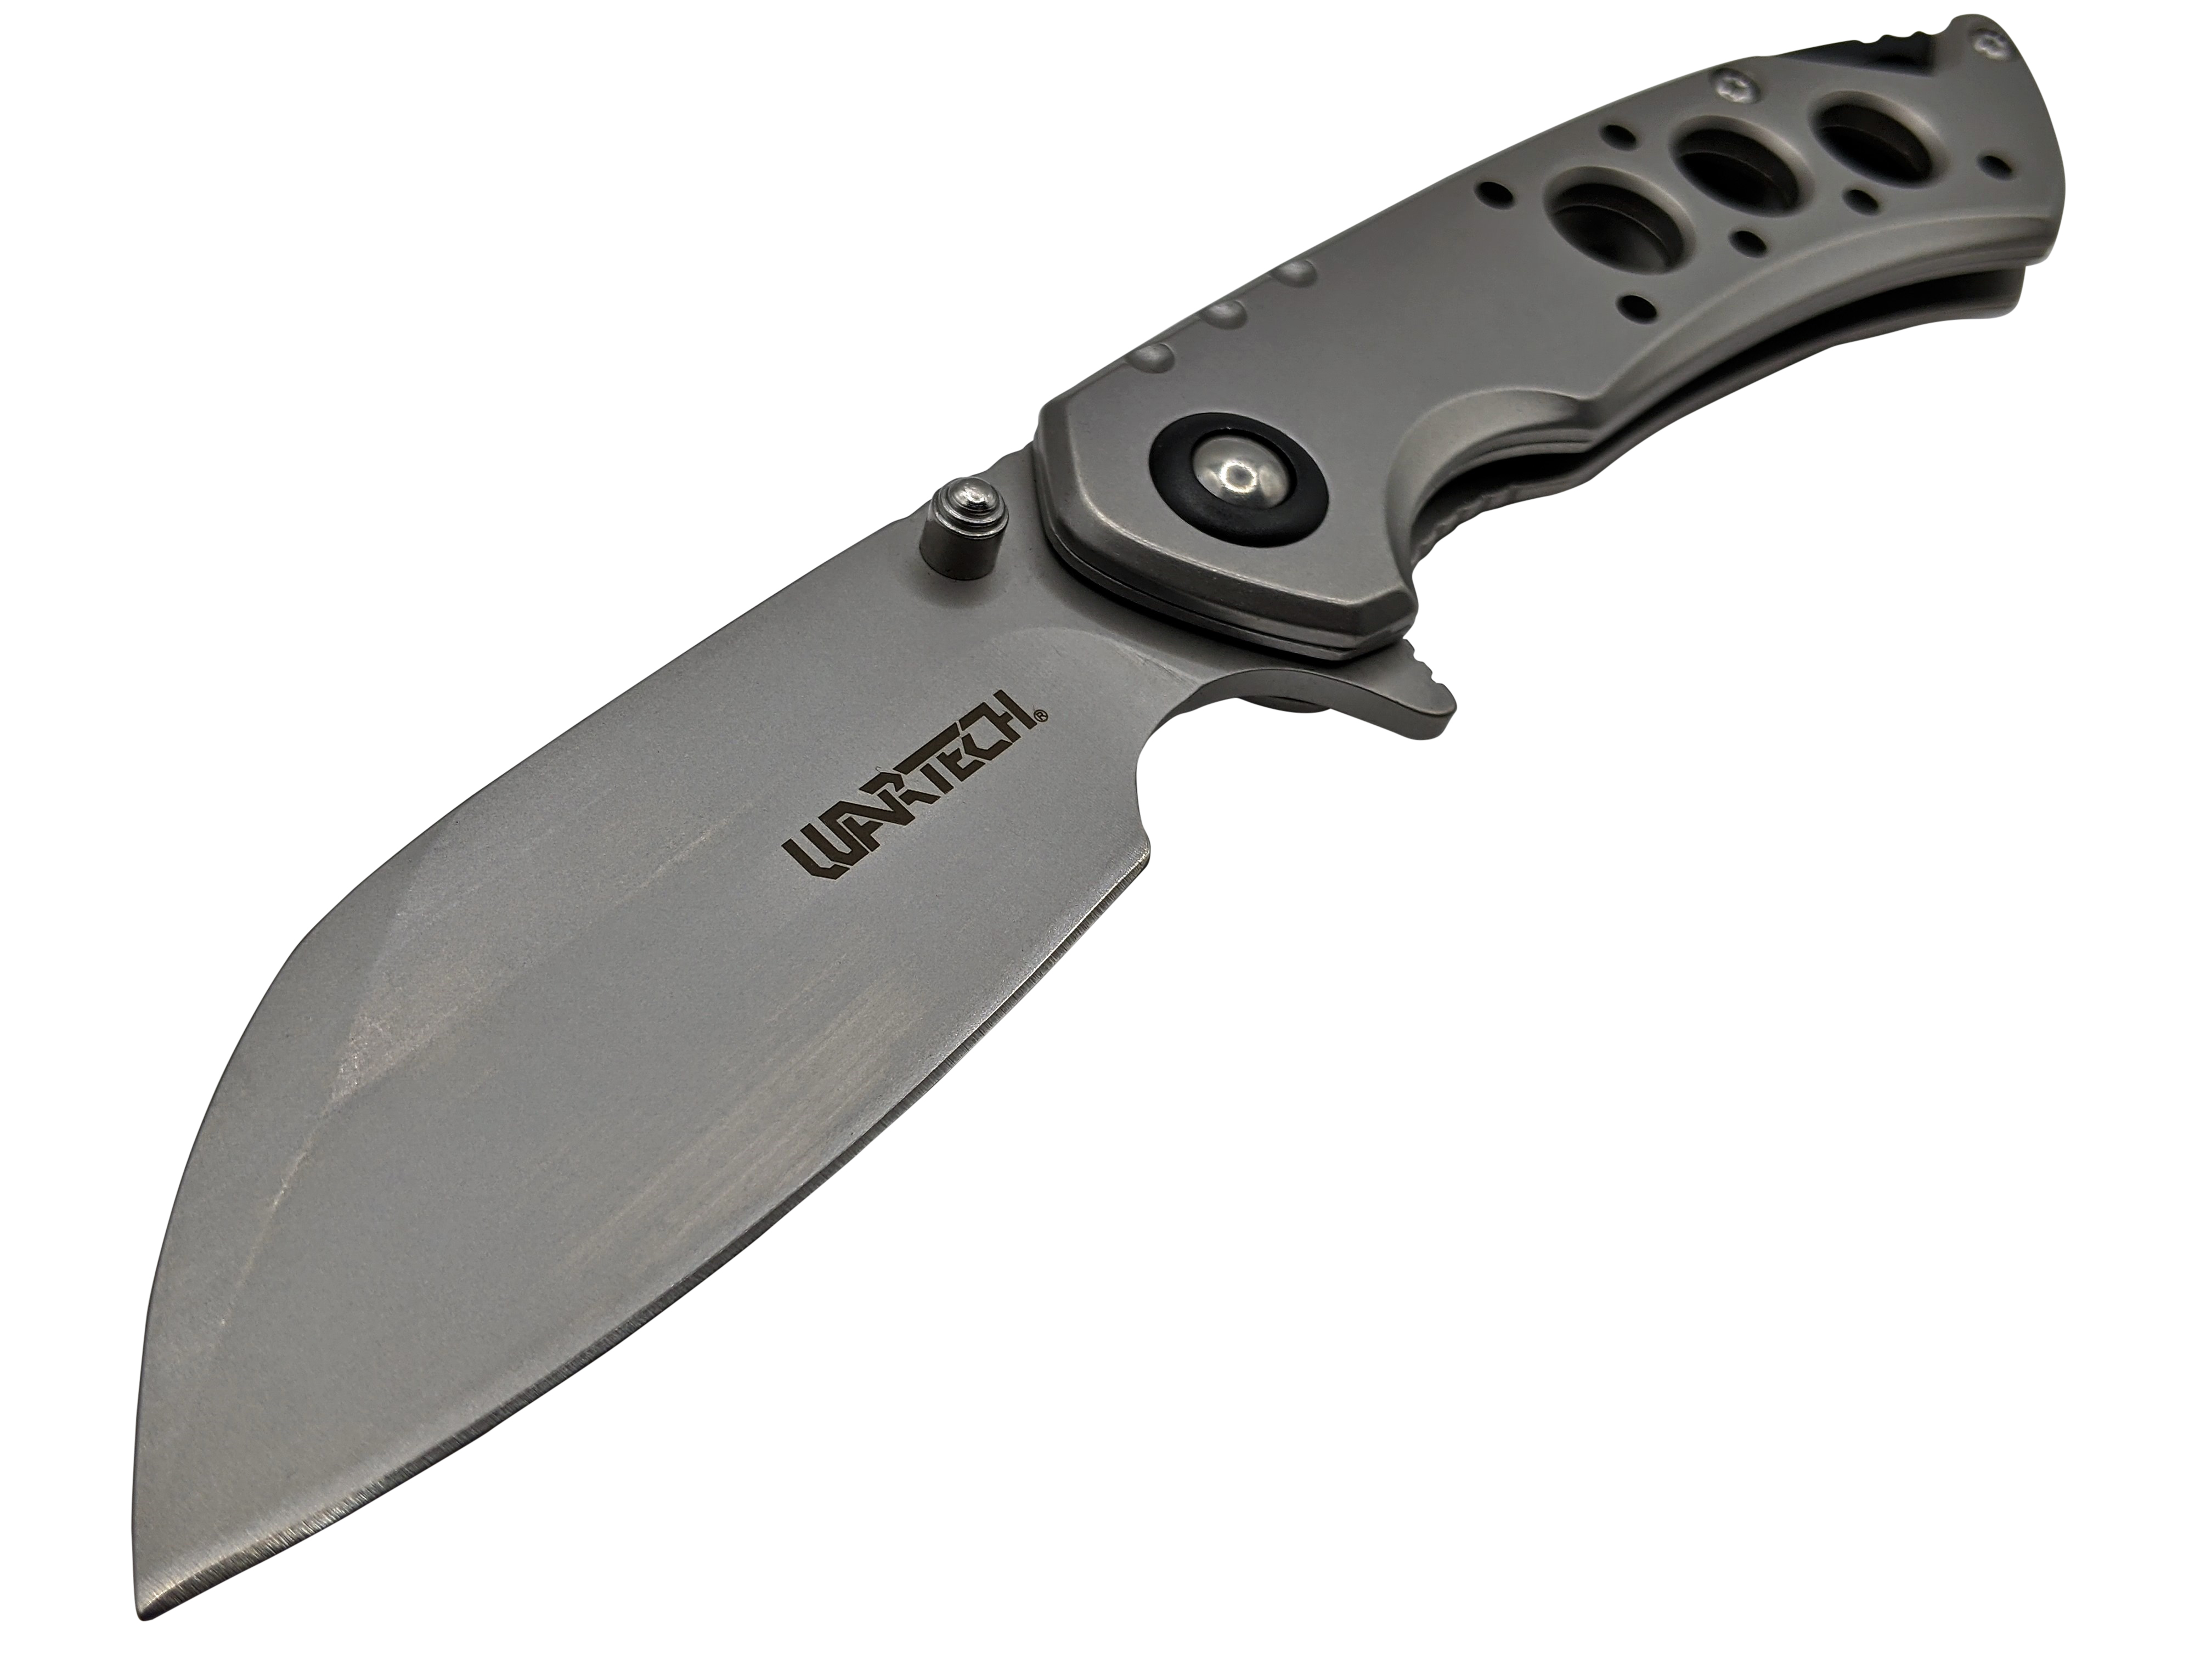 Spring-Assist Folding Knife 3.25in. Sheepsfoot Folding Blade Gray Tactical EDC